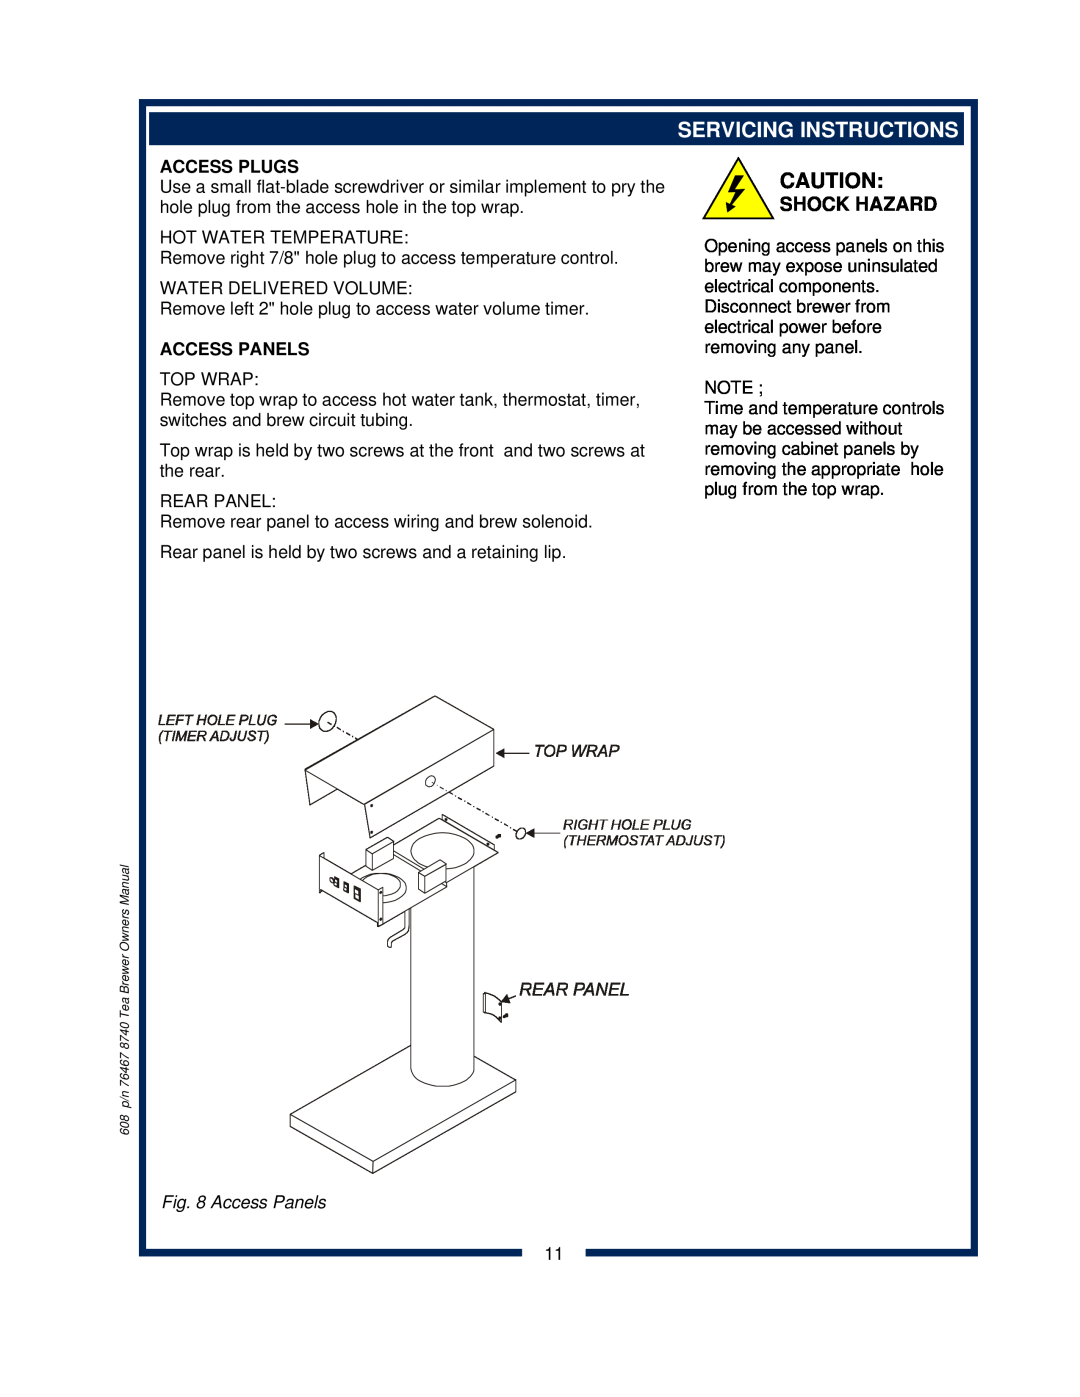 Bloomfield 8740 owner manual Servicing Instructions, Shock Hazard, Access Plugs, Access Panels 